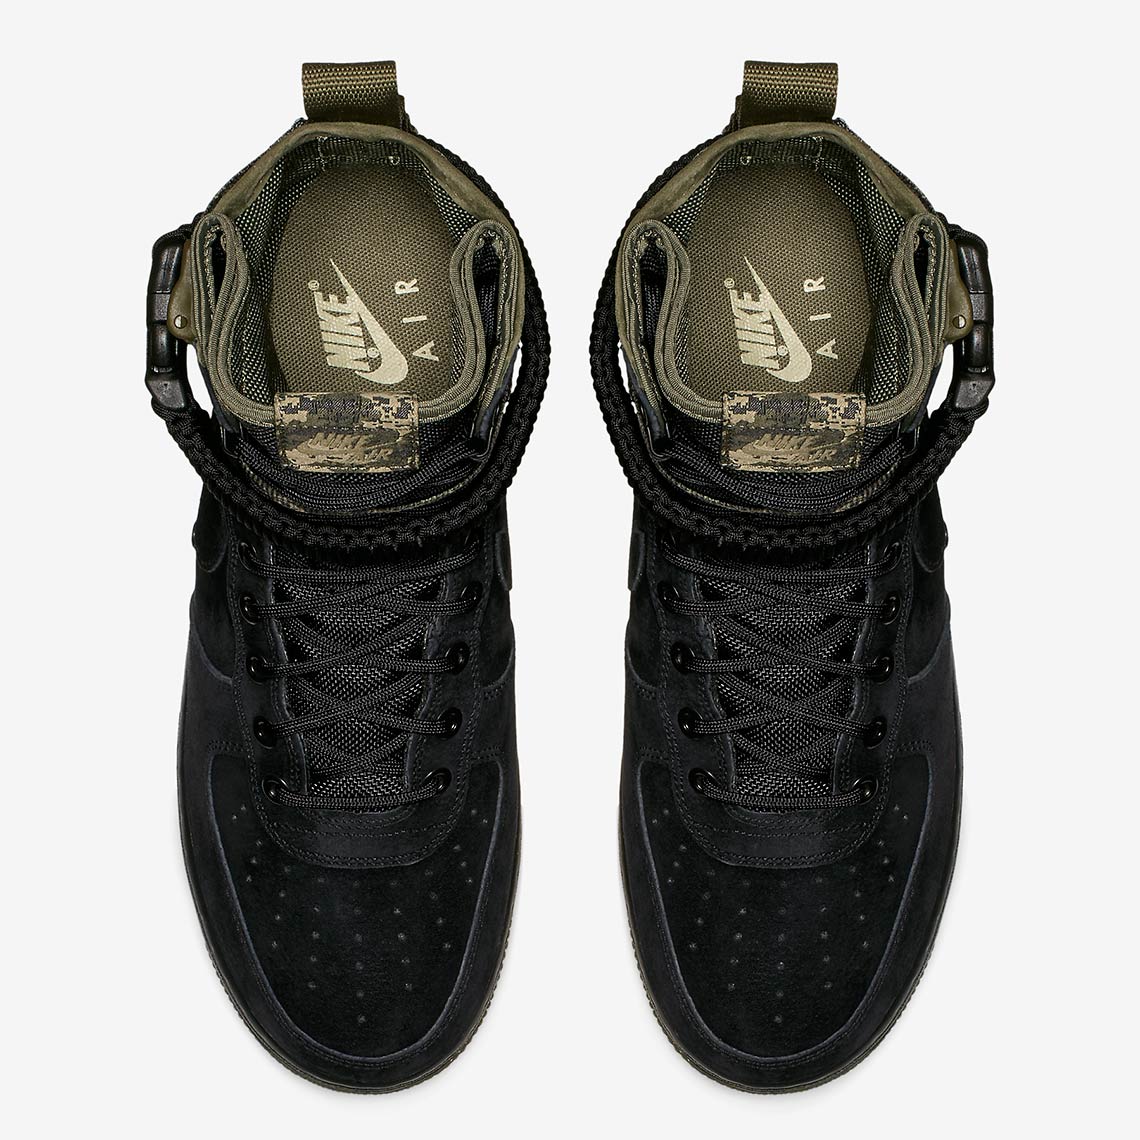 Nike SF-AF1 High Camo Available Now 864024-004